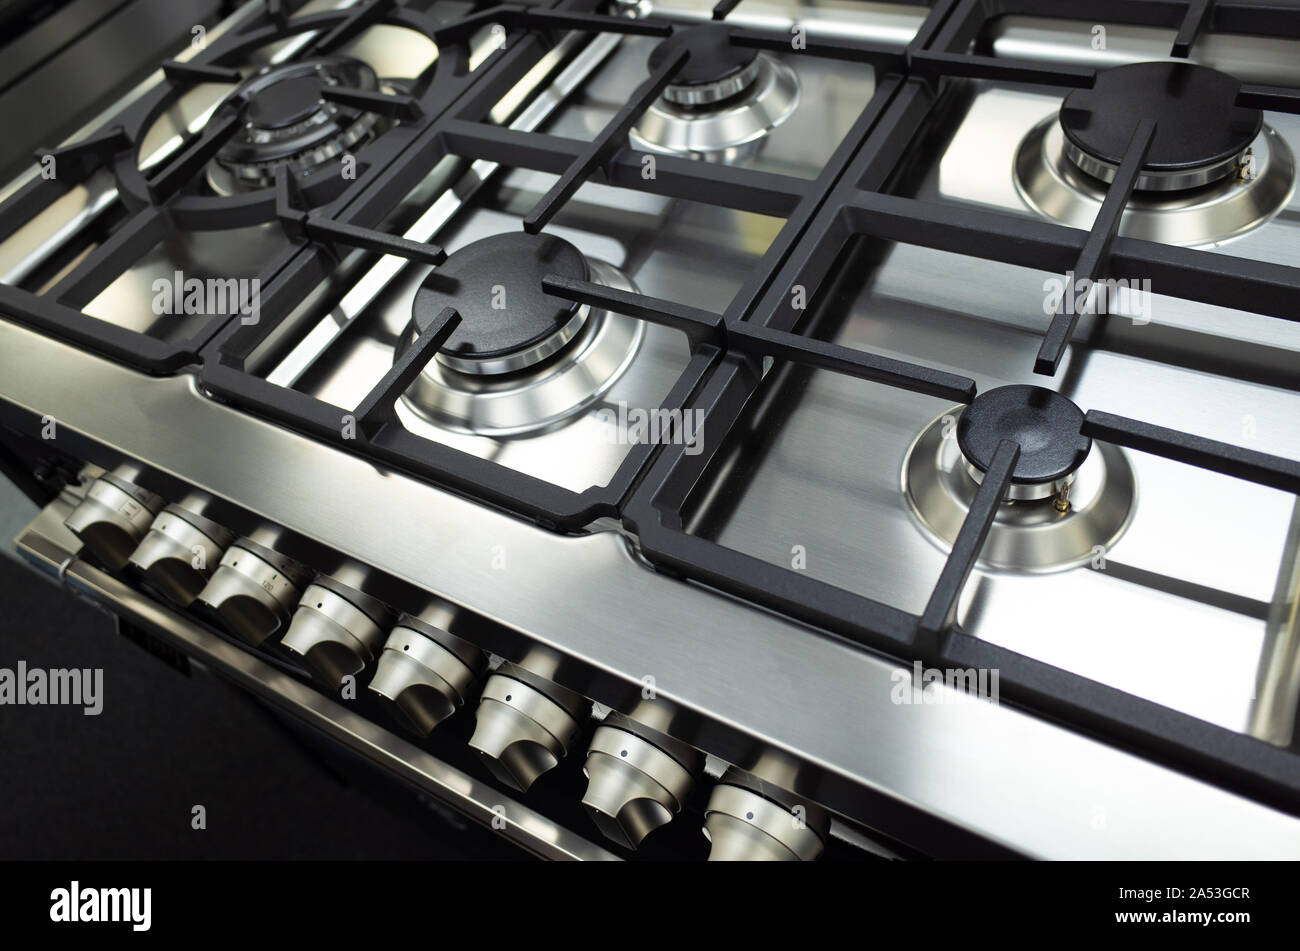 Close up of a brand new and clean stainless steel stove top/hop or a gas cooktop. Stock Photo